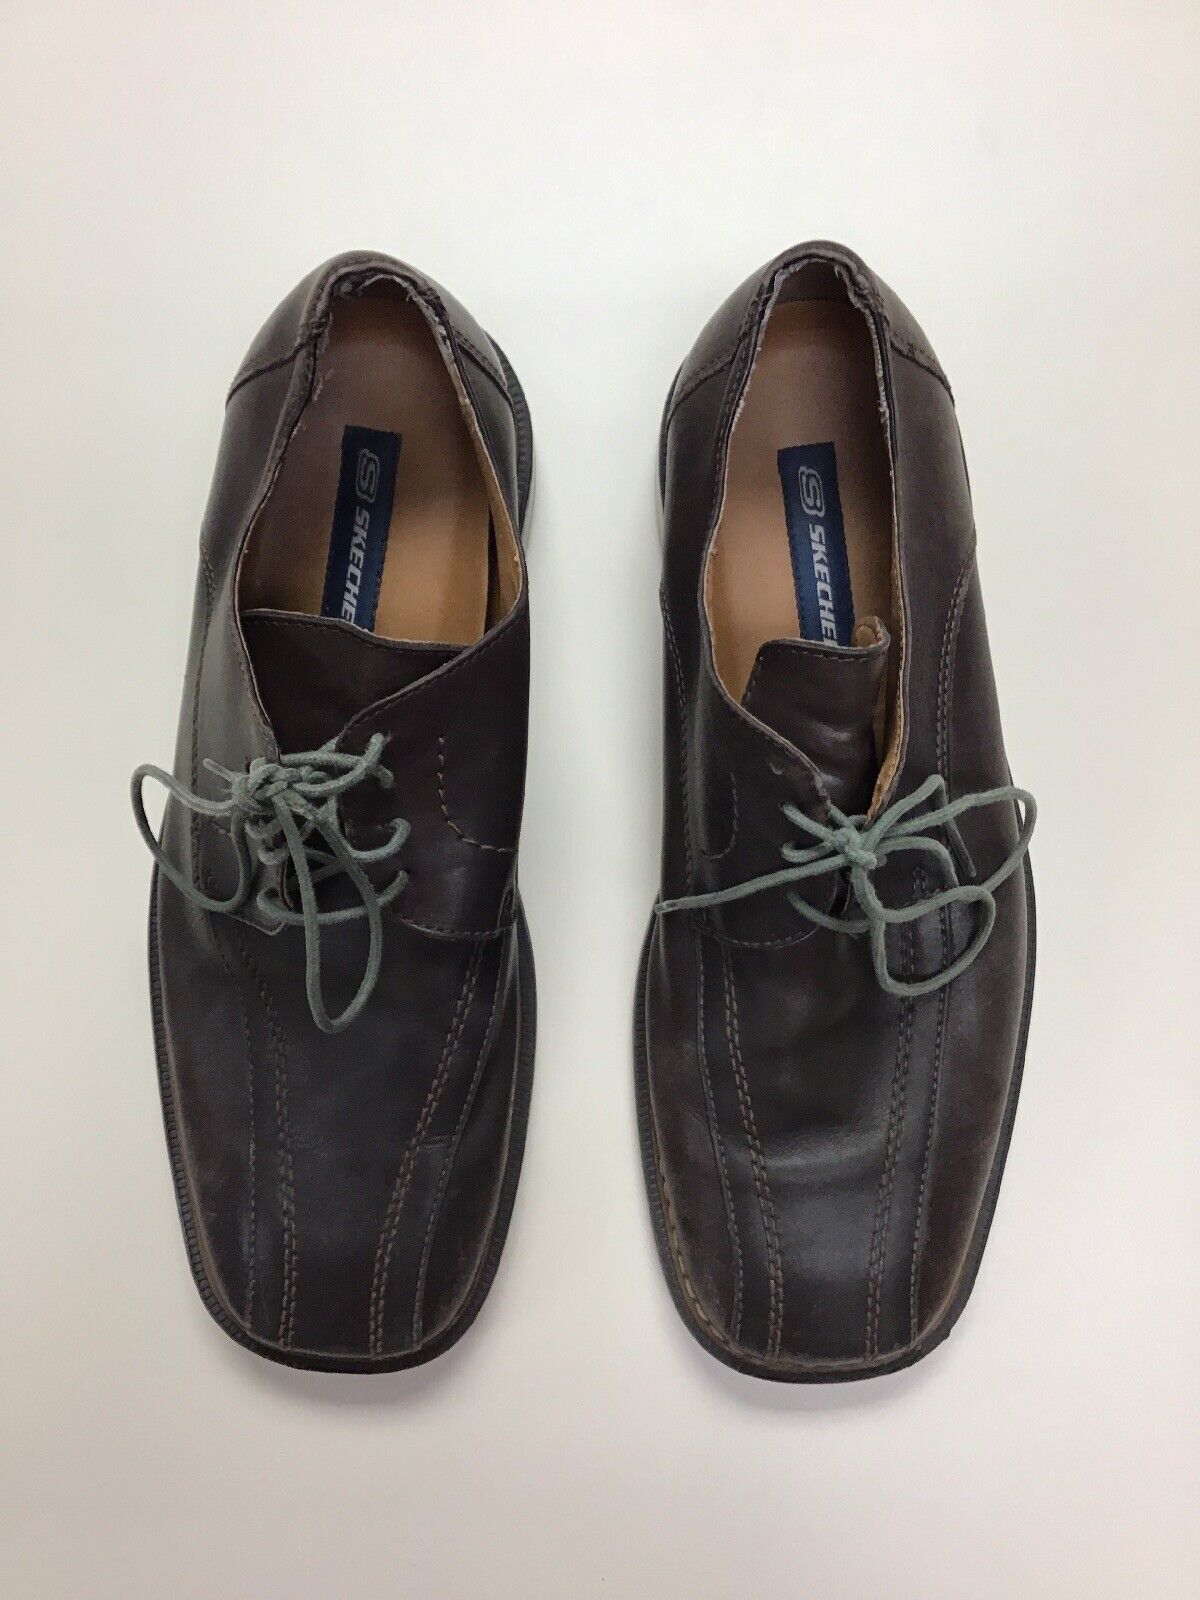 skechers brown lace up shoes